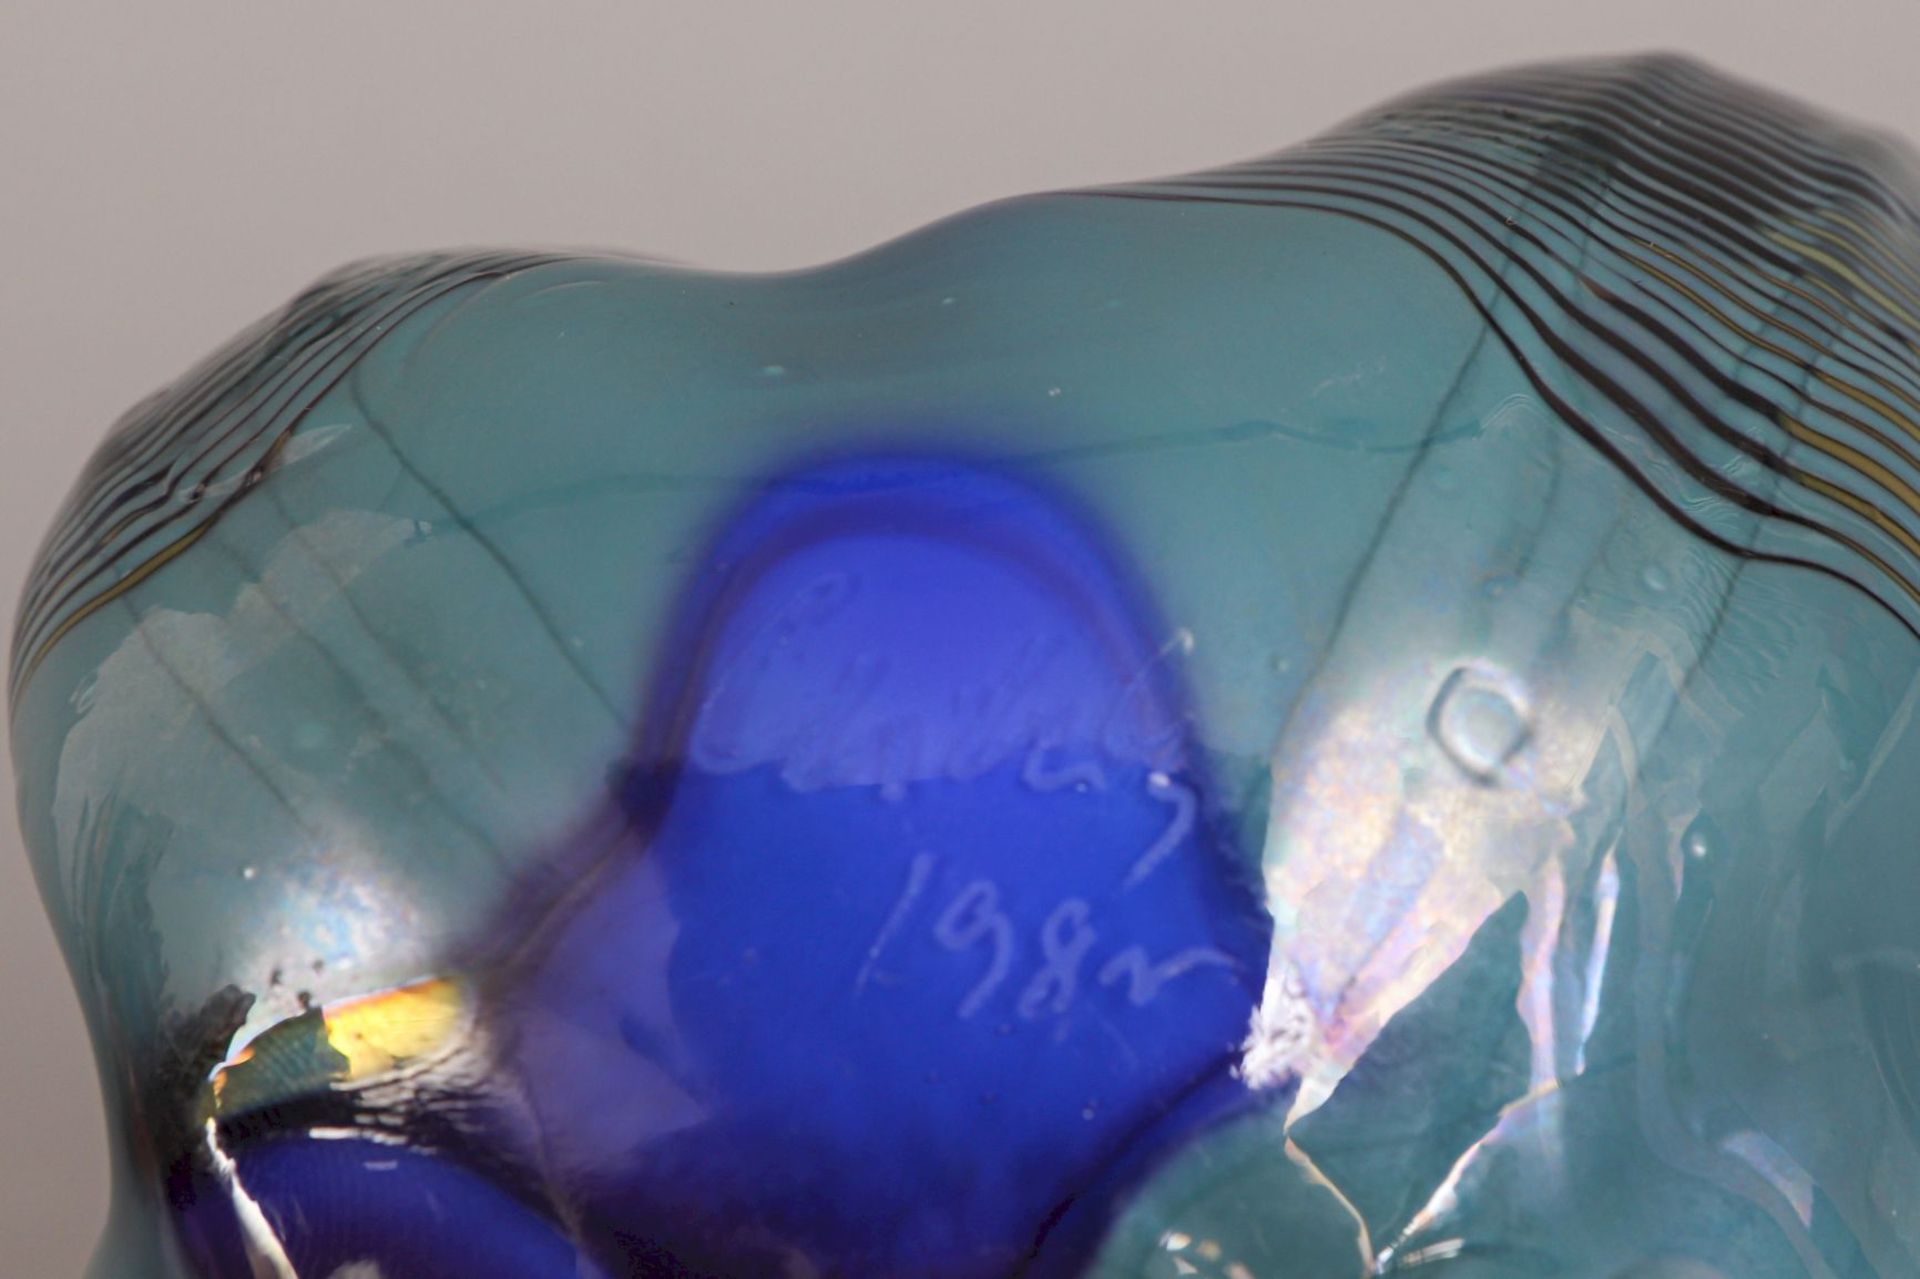 Dale Patrick CHIHULY (1941), Glasschale ¨Blue Macchia¨ - Image 5 of 5